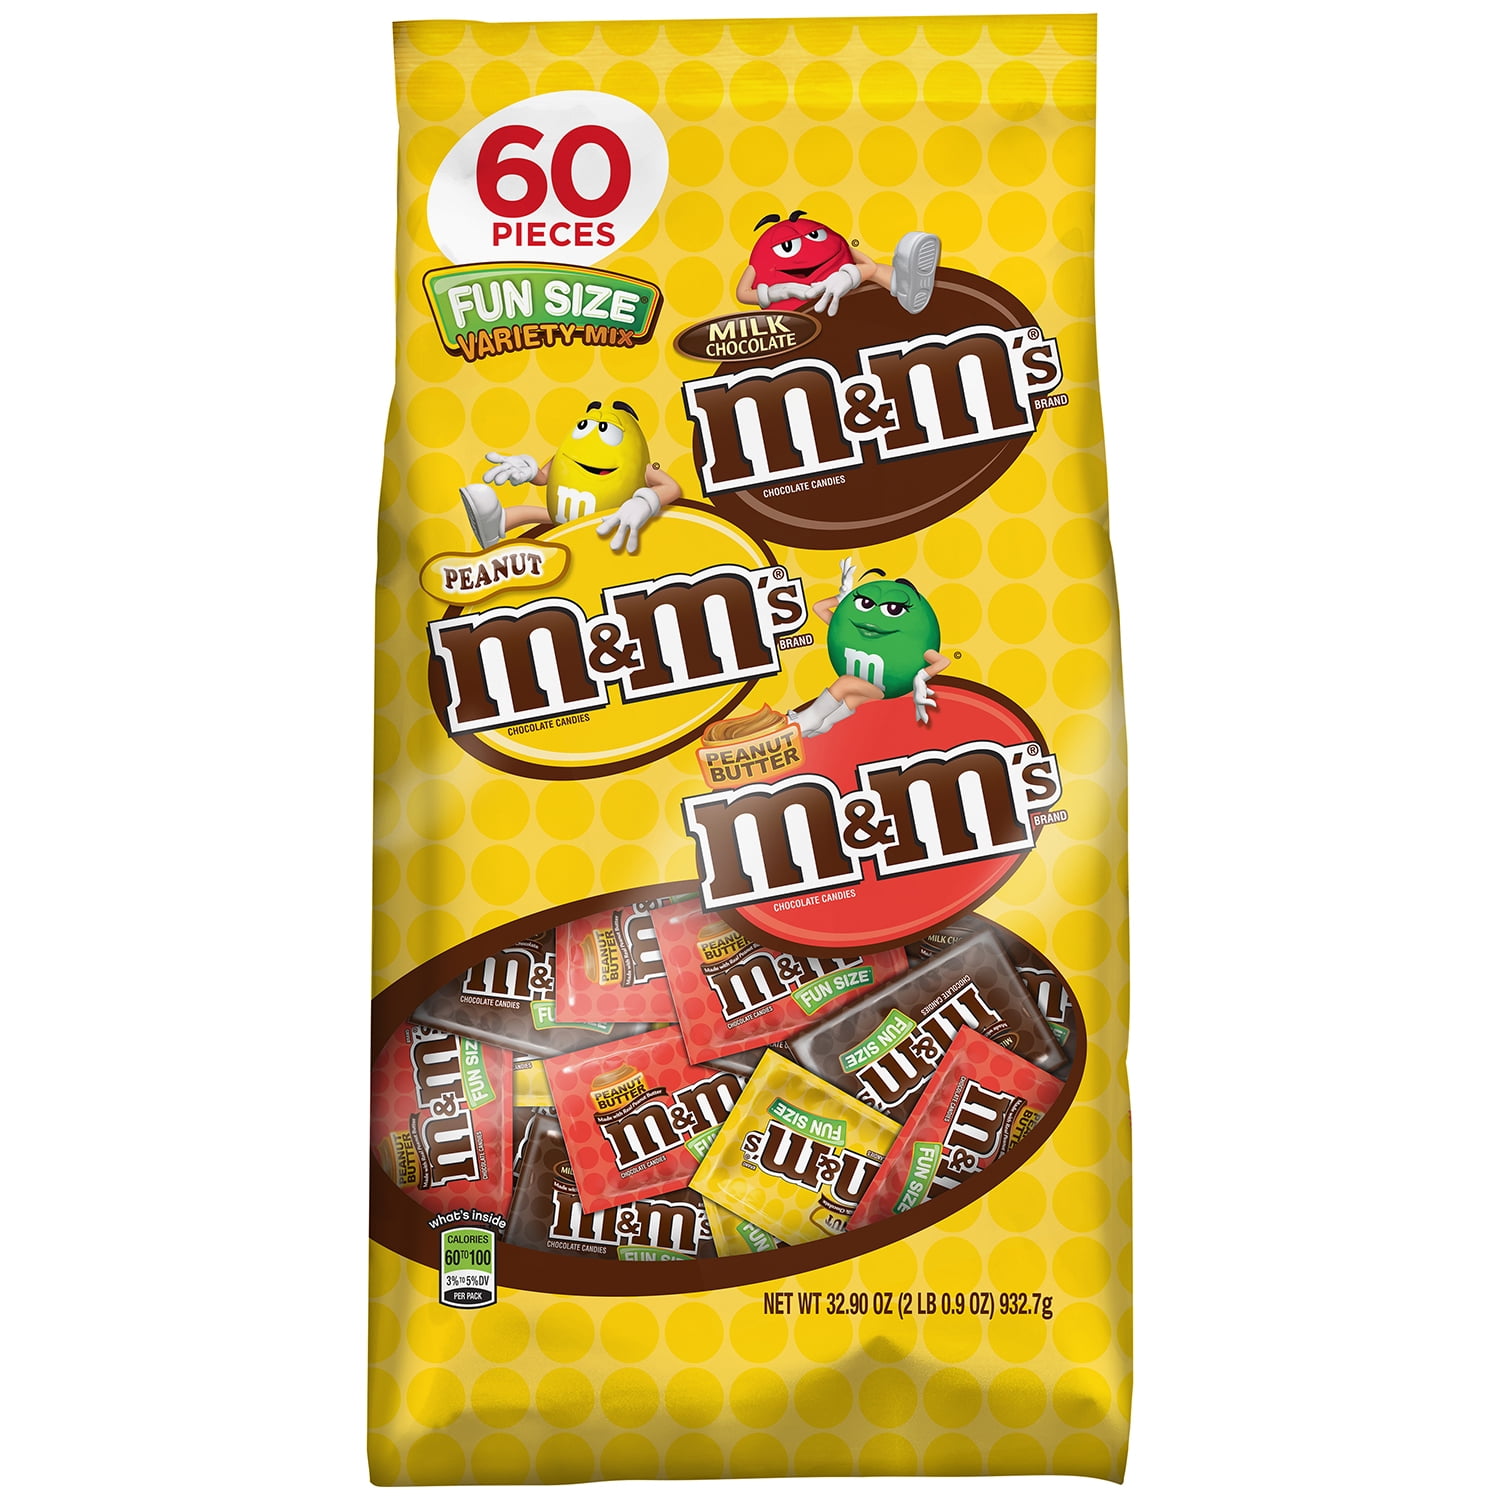 M&M's Peanut Fun Size, Fresh Groceries Delivery